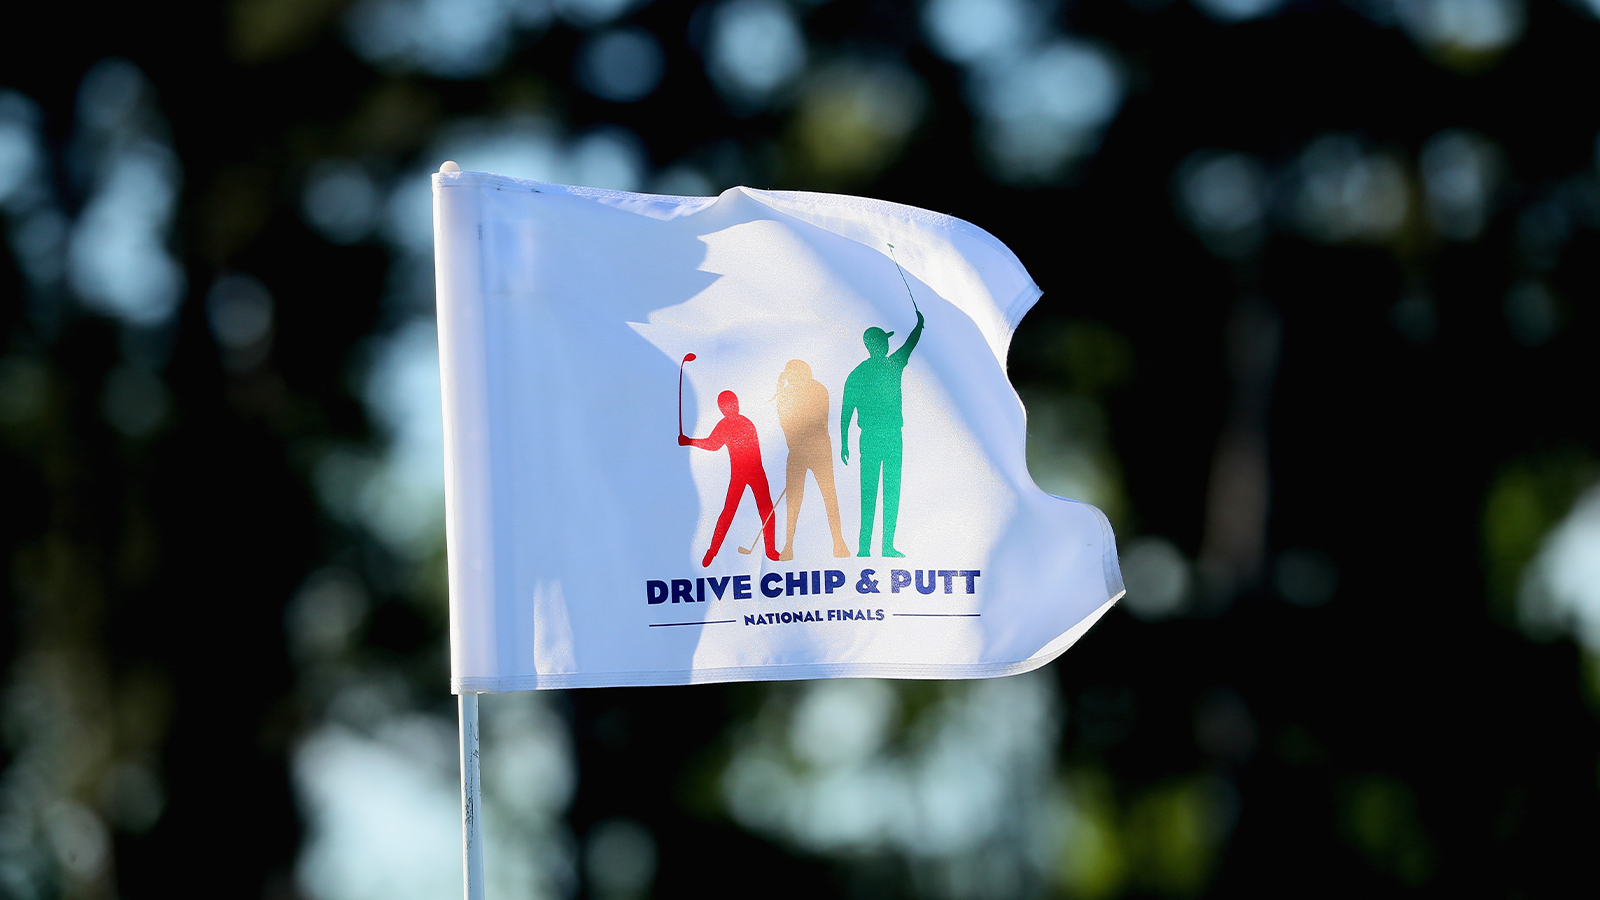 A close-up of a pin flag during the Drive, Chip and Putt Championship at Augusta National Golf Club.